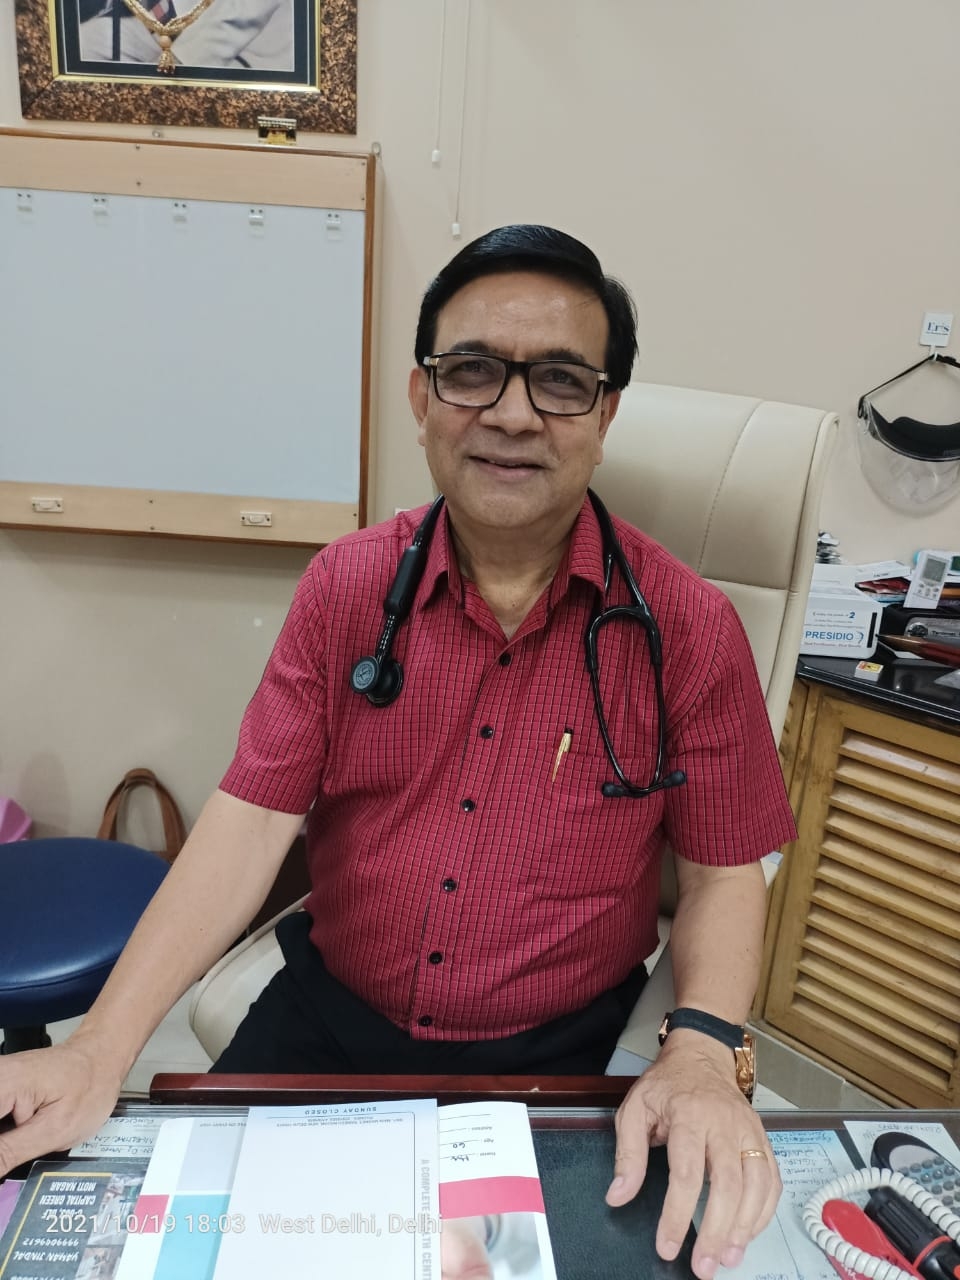 Dr. Arun Anand